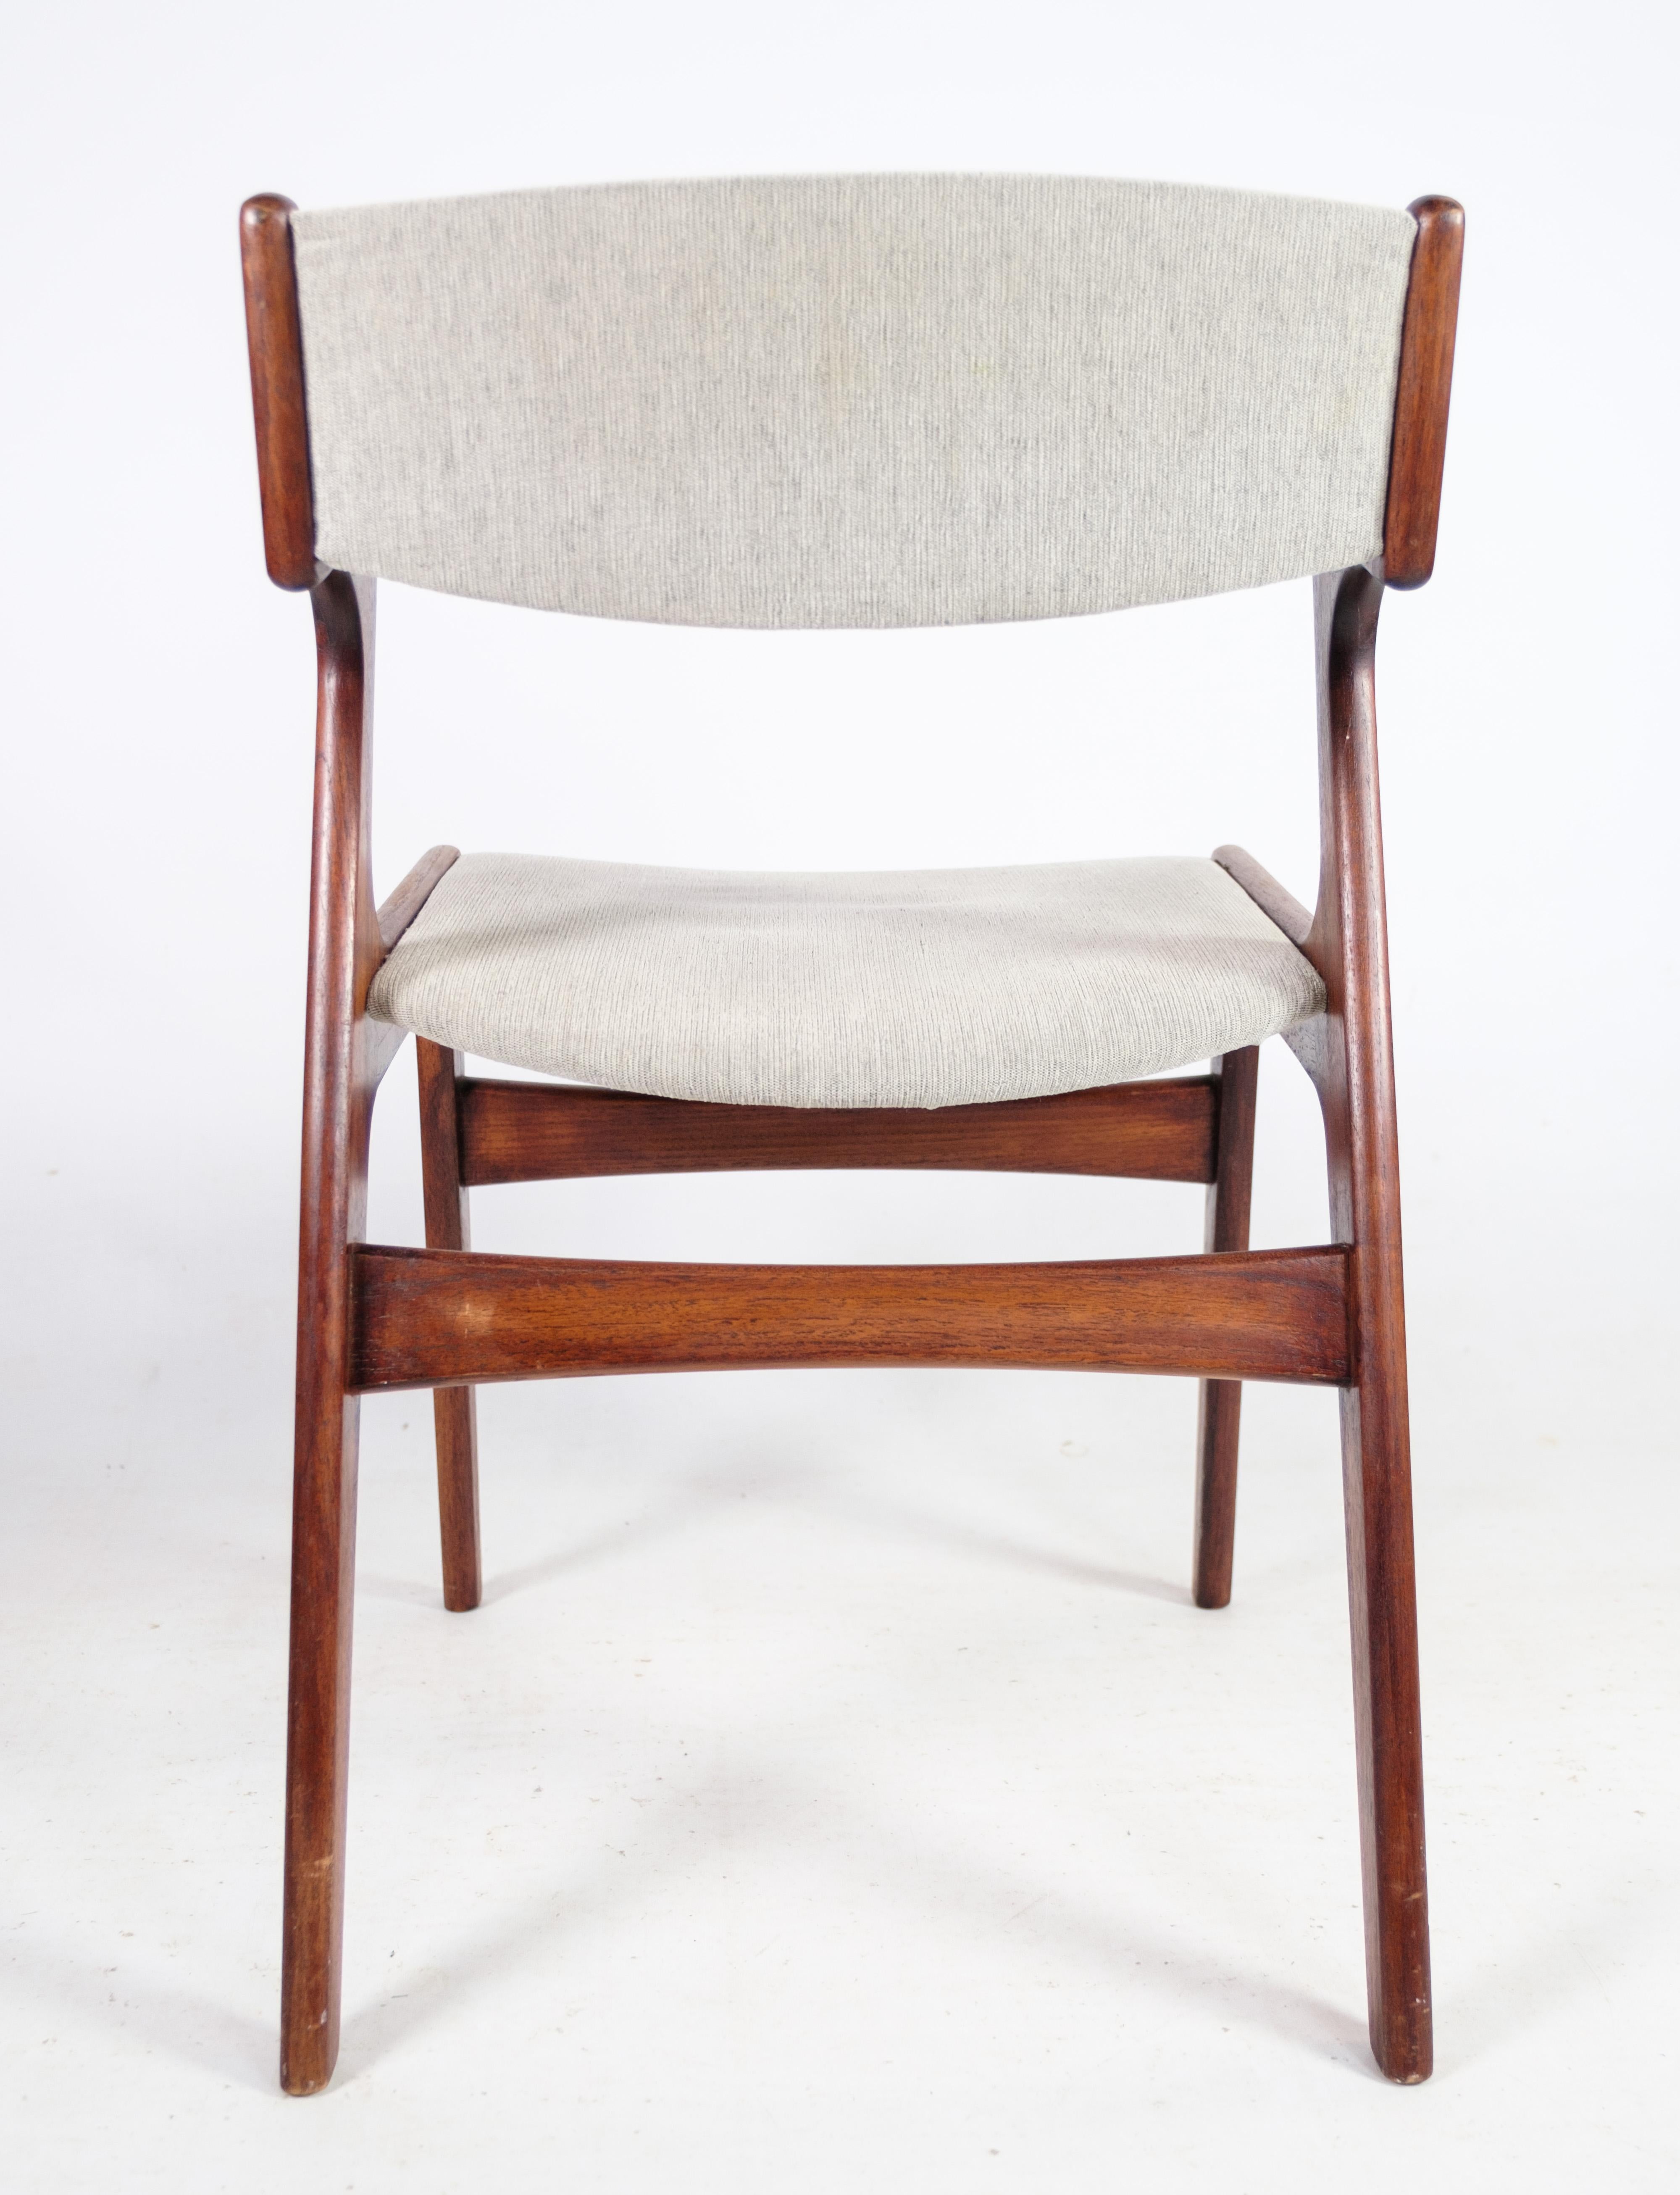 Fabric Set of 4 Dining Chairs, Teak, Nova Furniture, 1960s For Sale